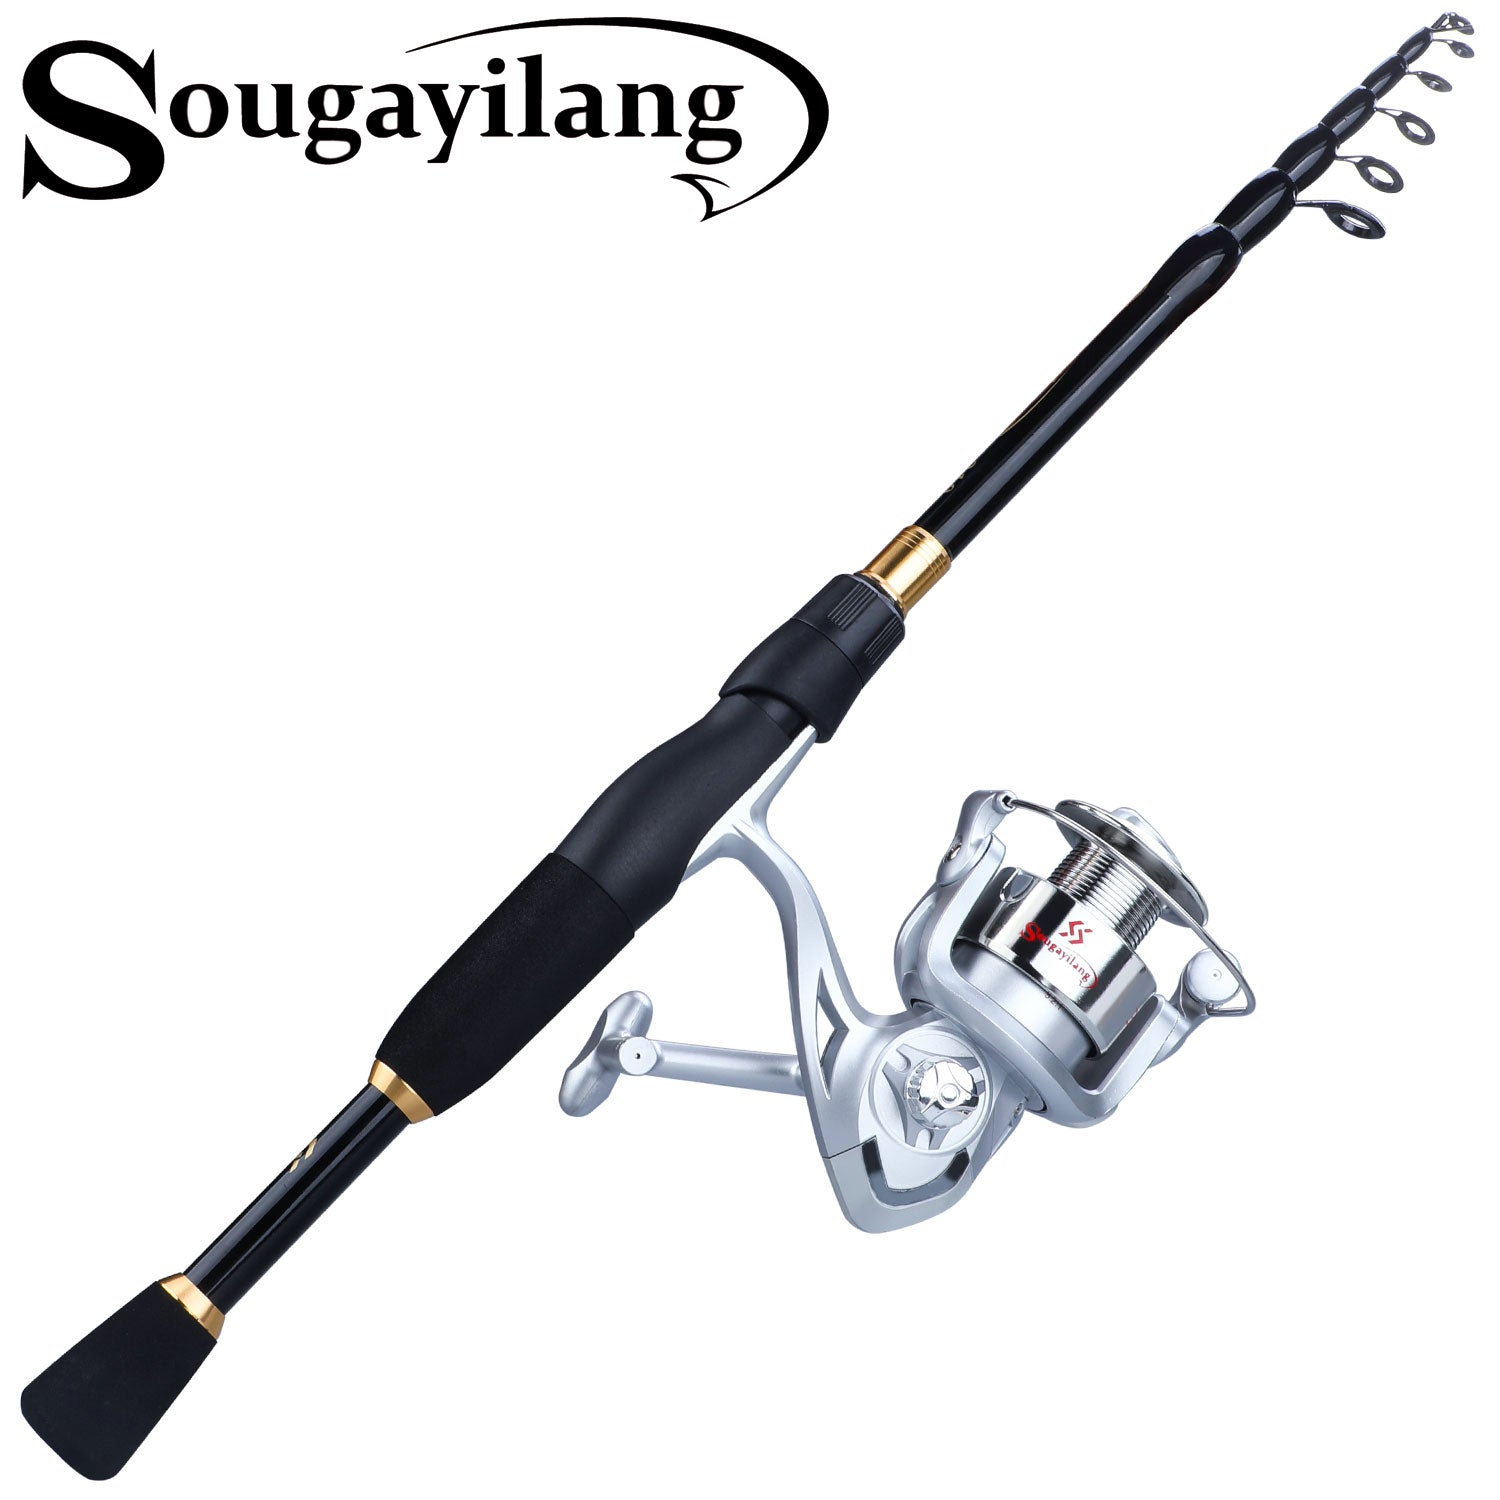 Clear inventory 1.8M Carbon Fiber Trout fishing pole Spinning Rod Lure Rods  Power M Lure 4-10g Fishing Tackle Sea Rod